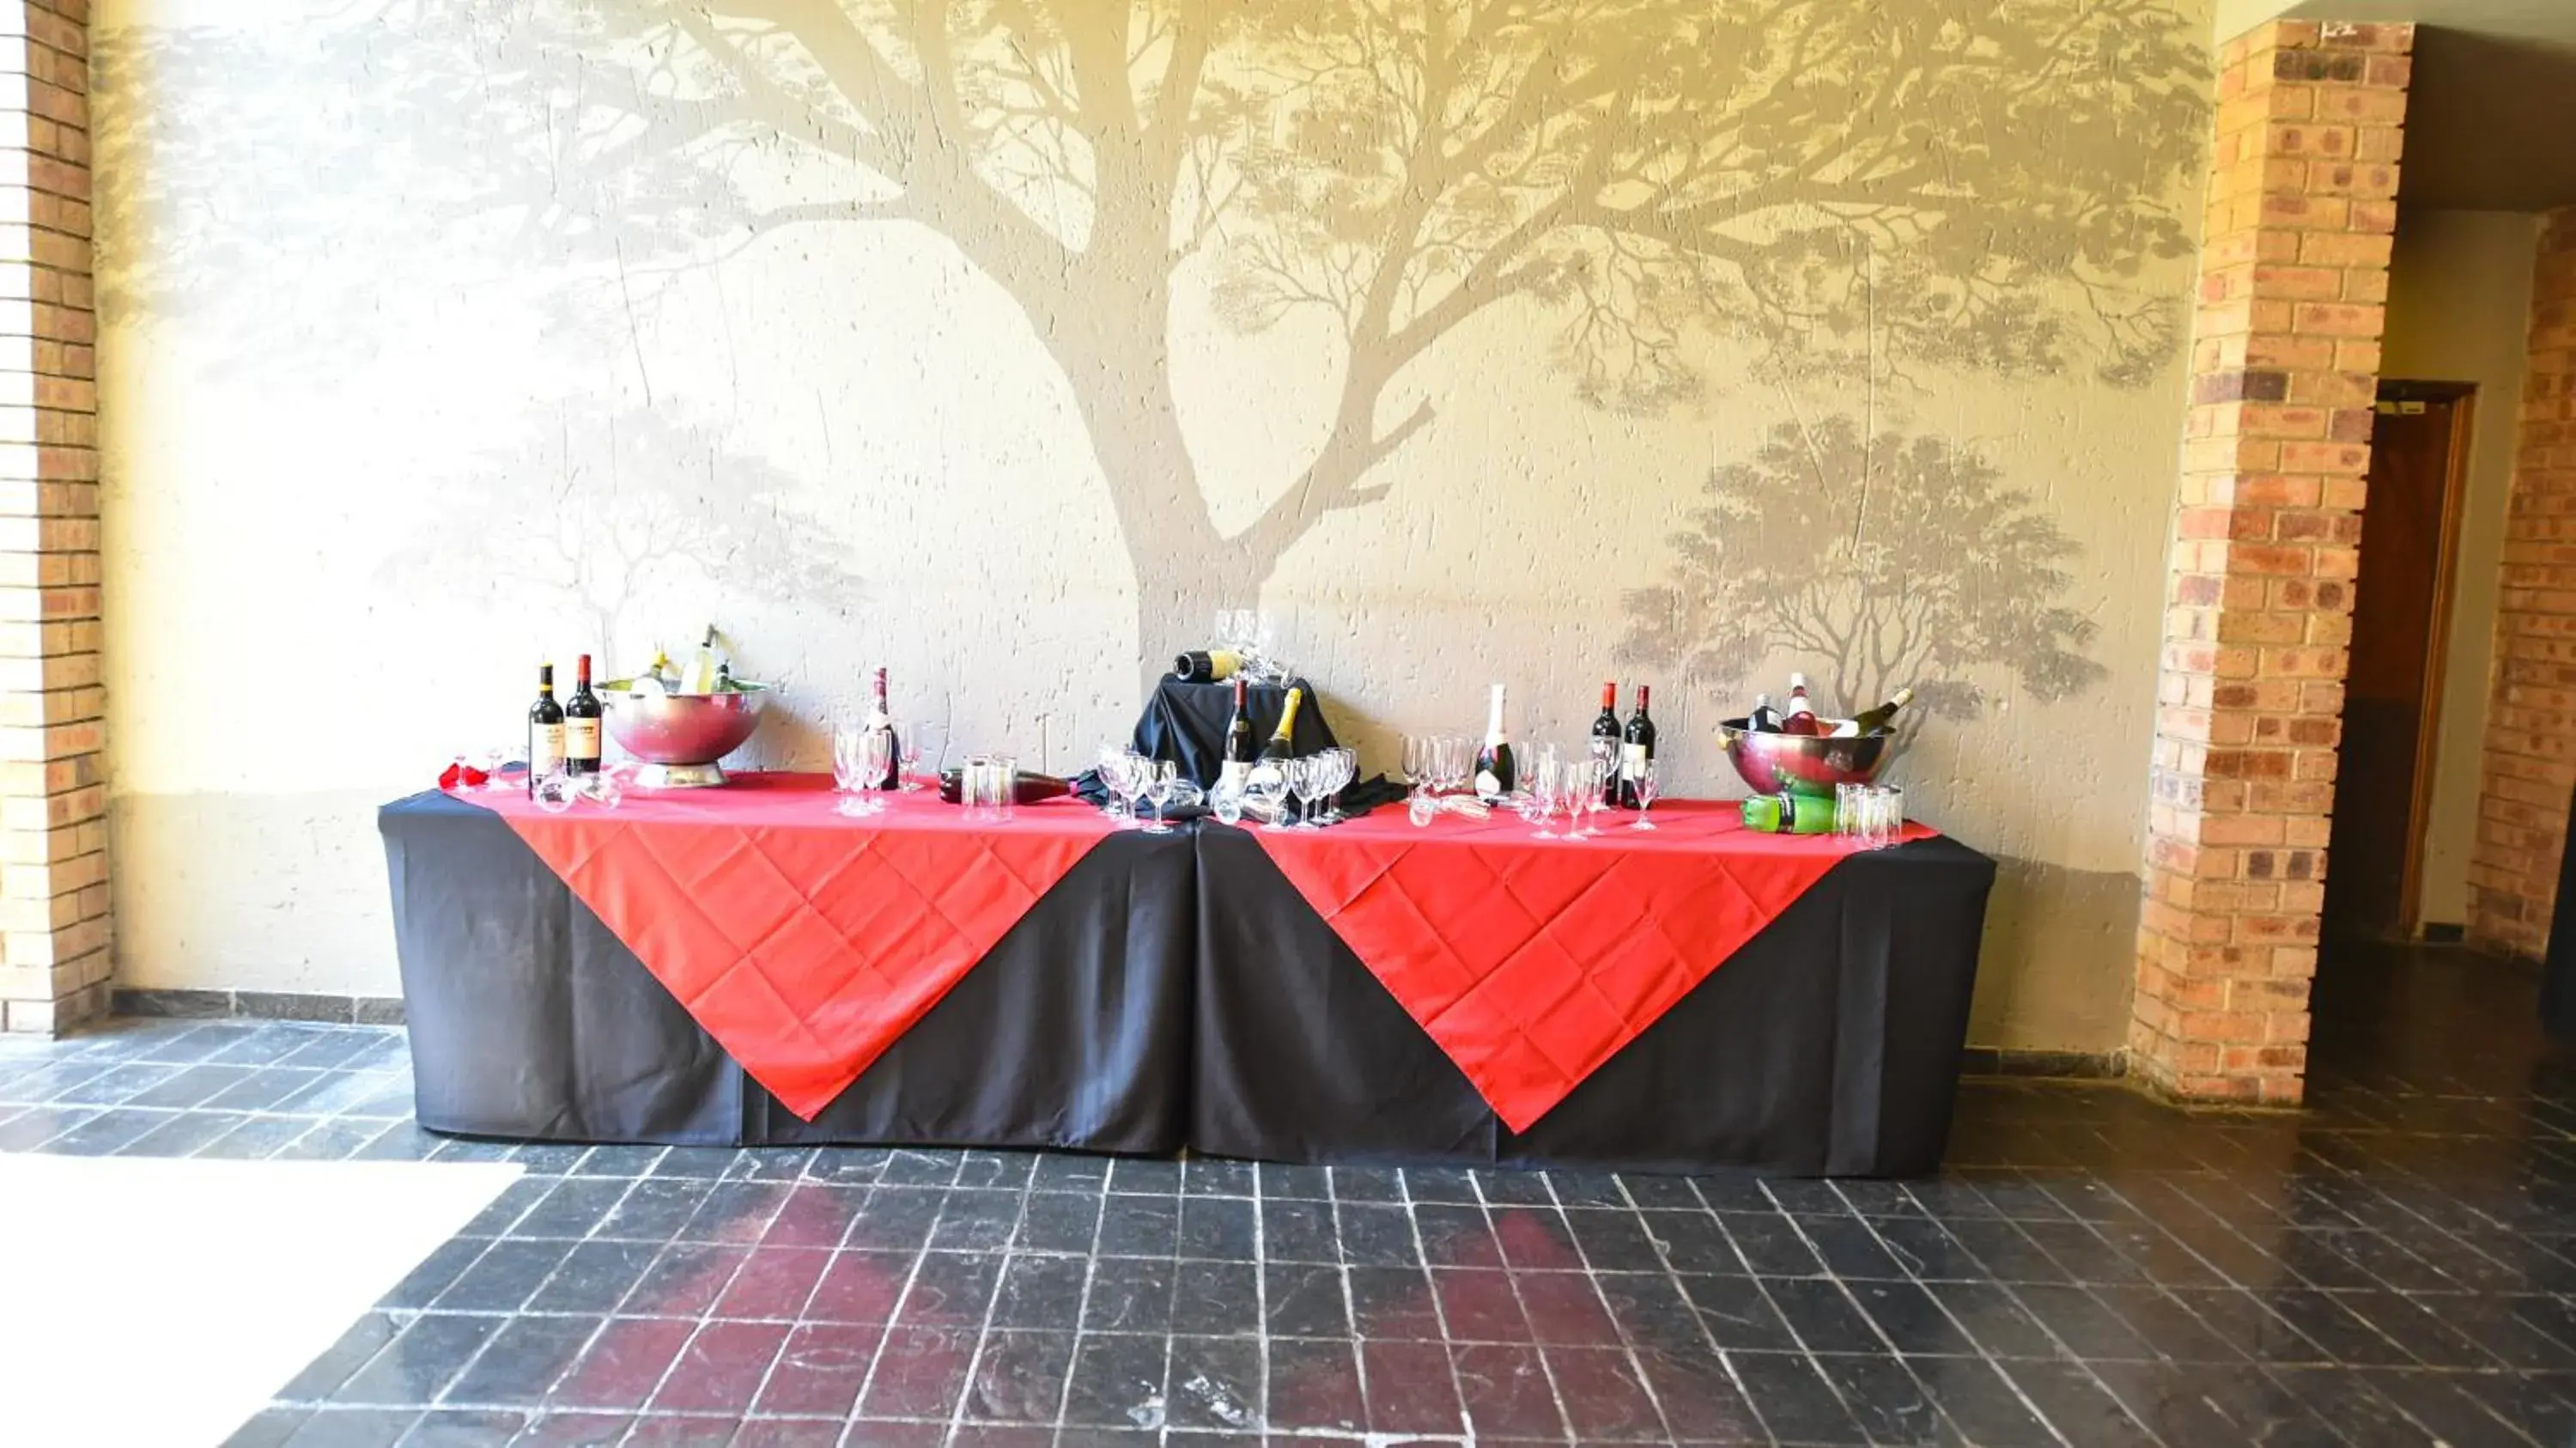 Food and drinks, Banquet Facilities in CedarWoods of Sandton